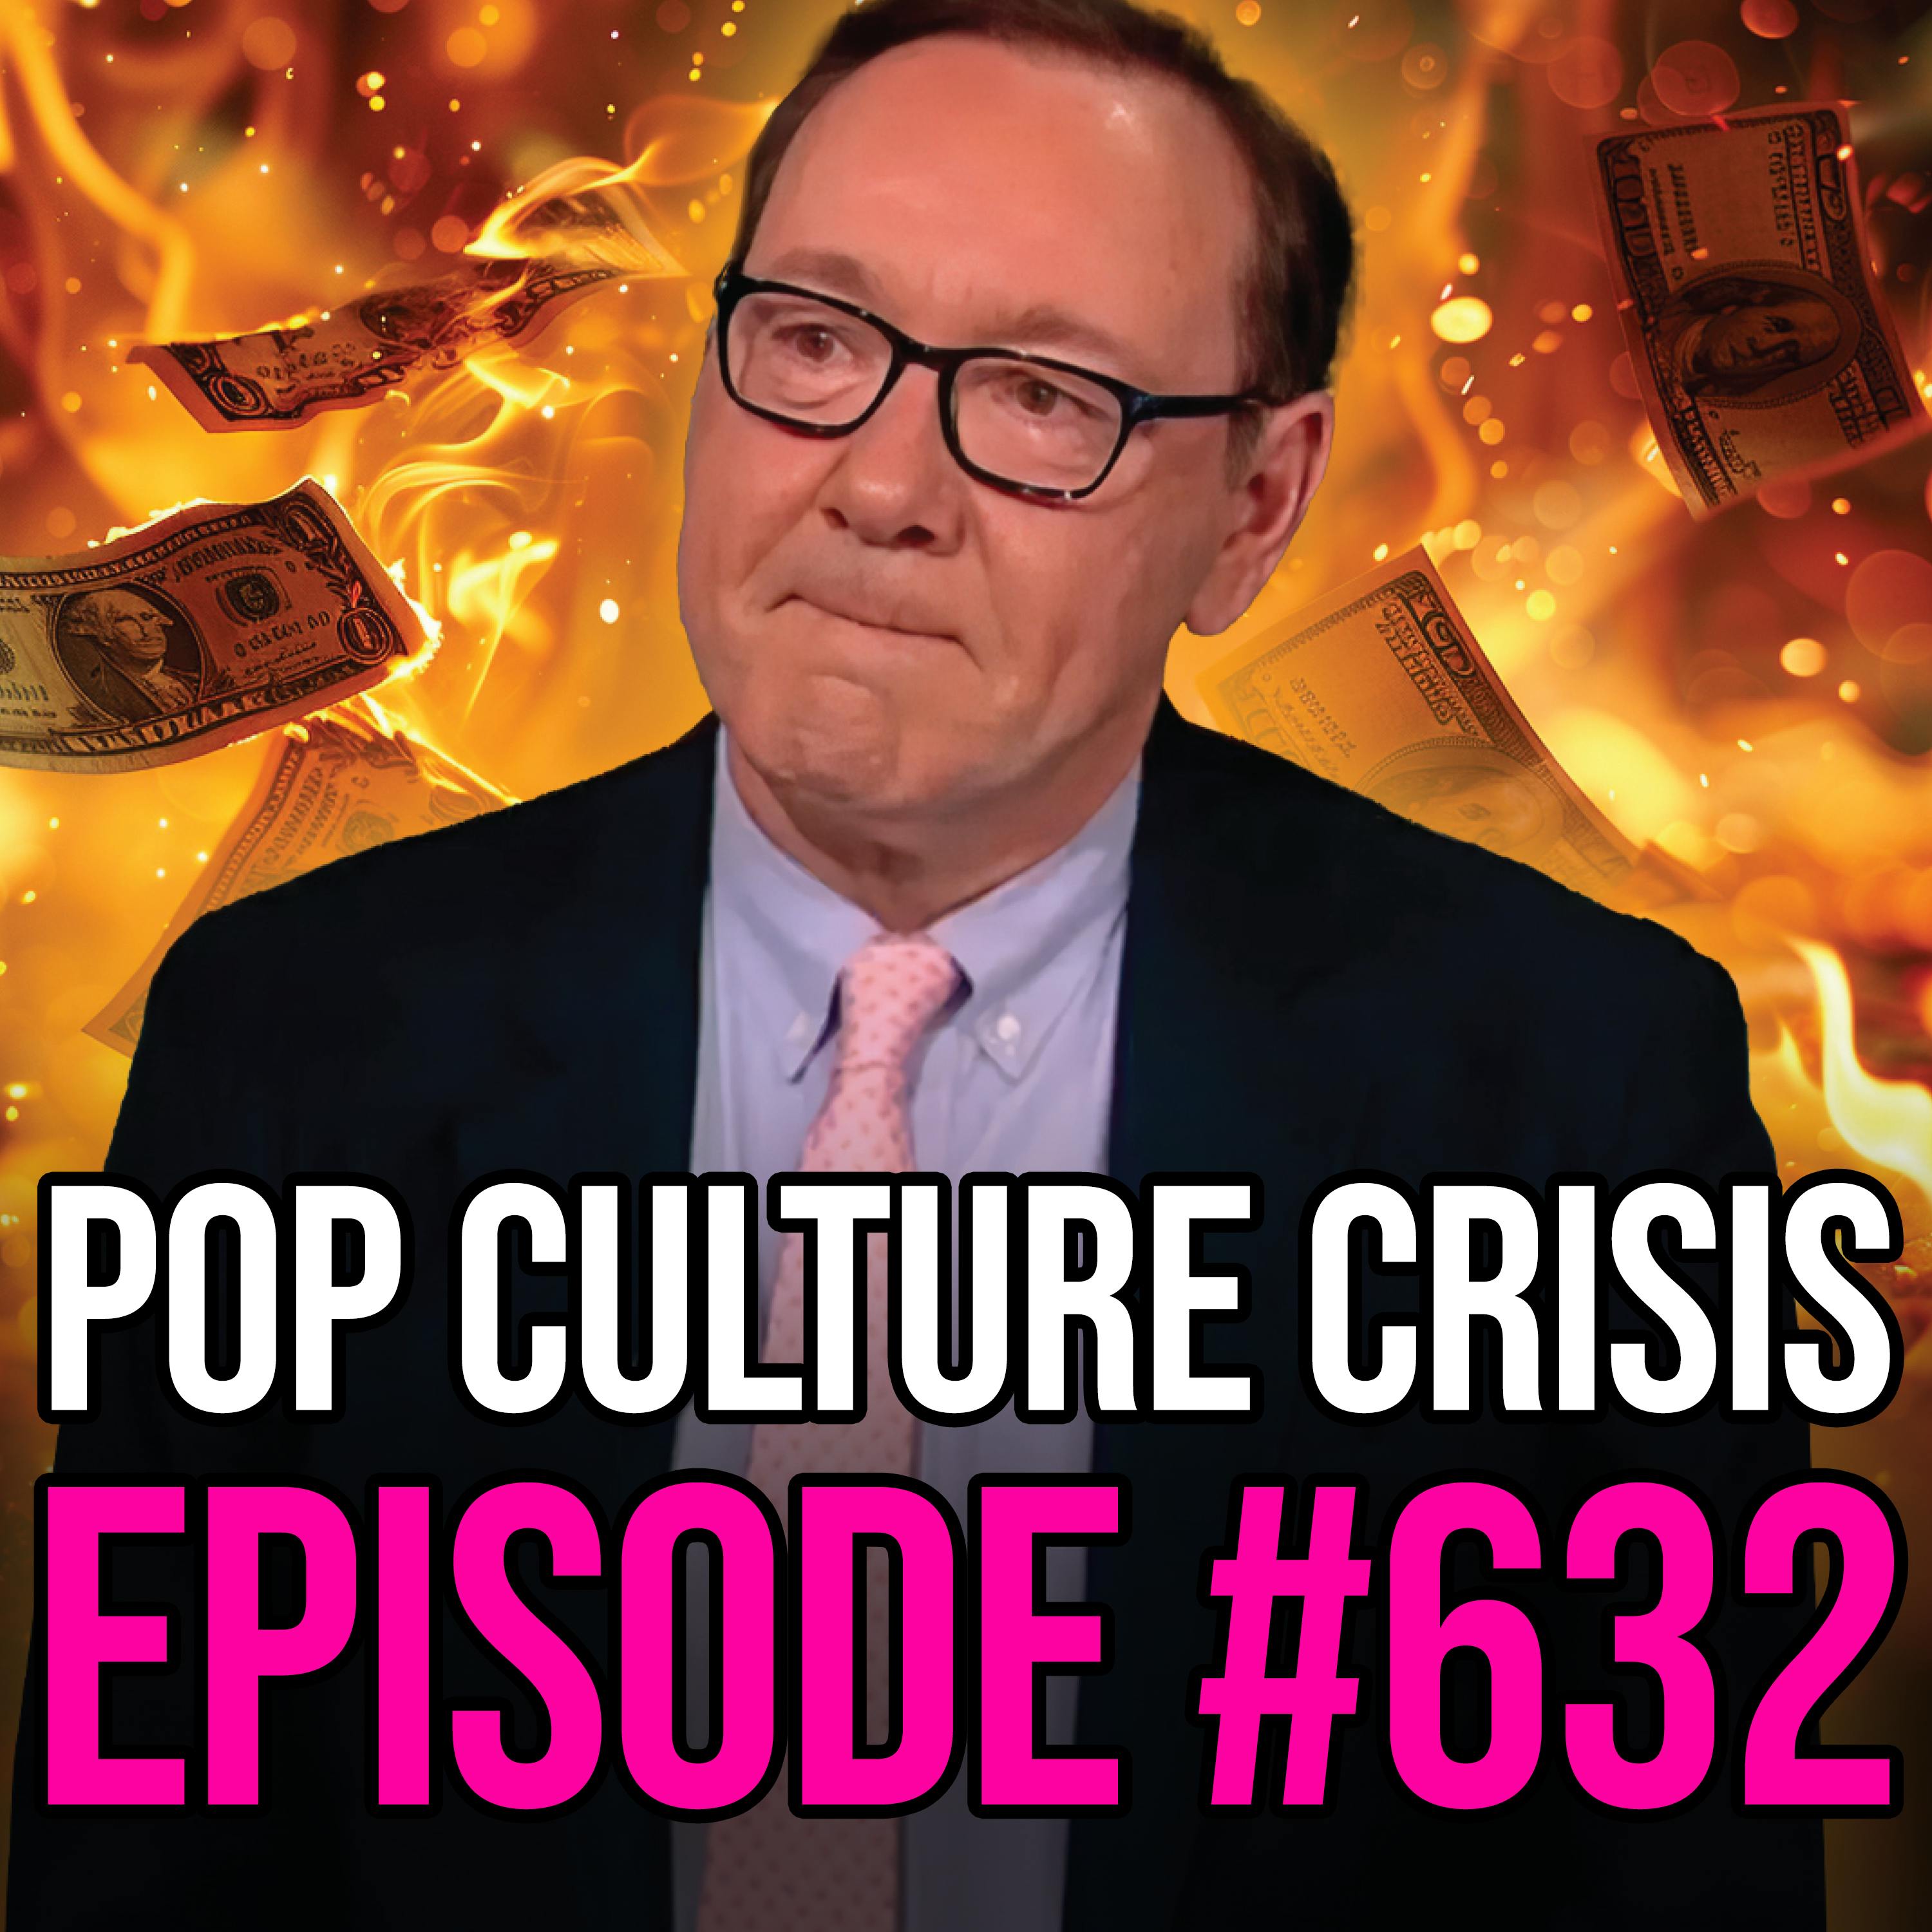 EPISODE 632; Kevin Spacey Has Nothing Left to Lose, Nic Cage in Hunter Biden Movie, Fillers Aging Women